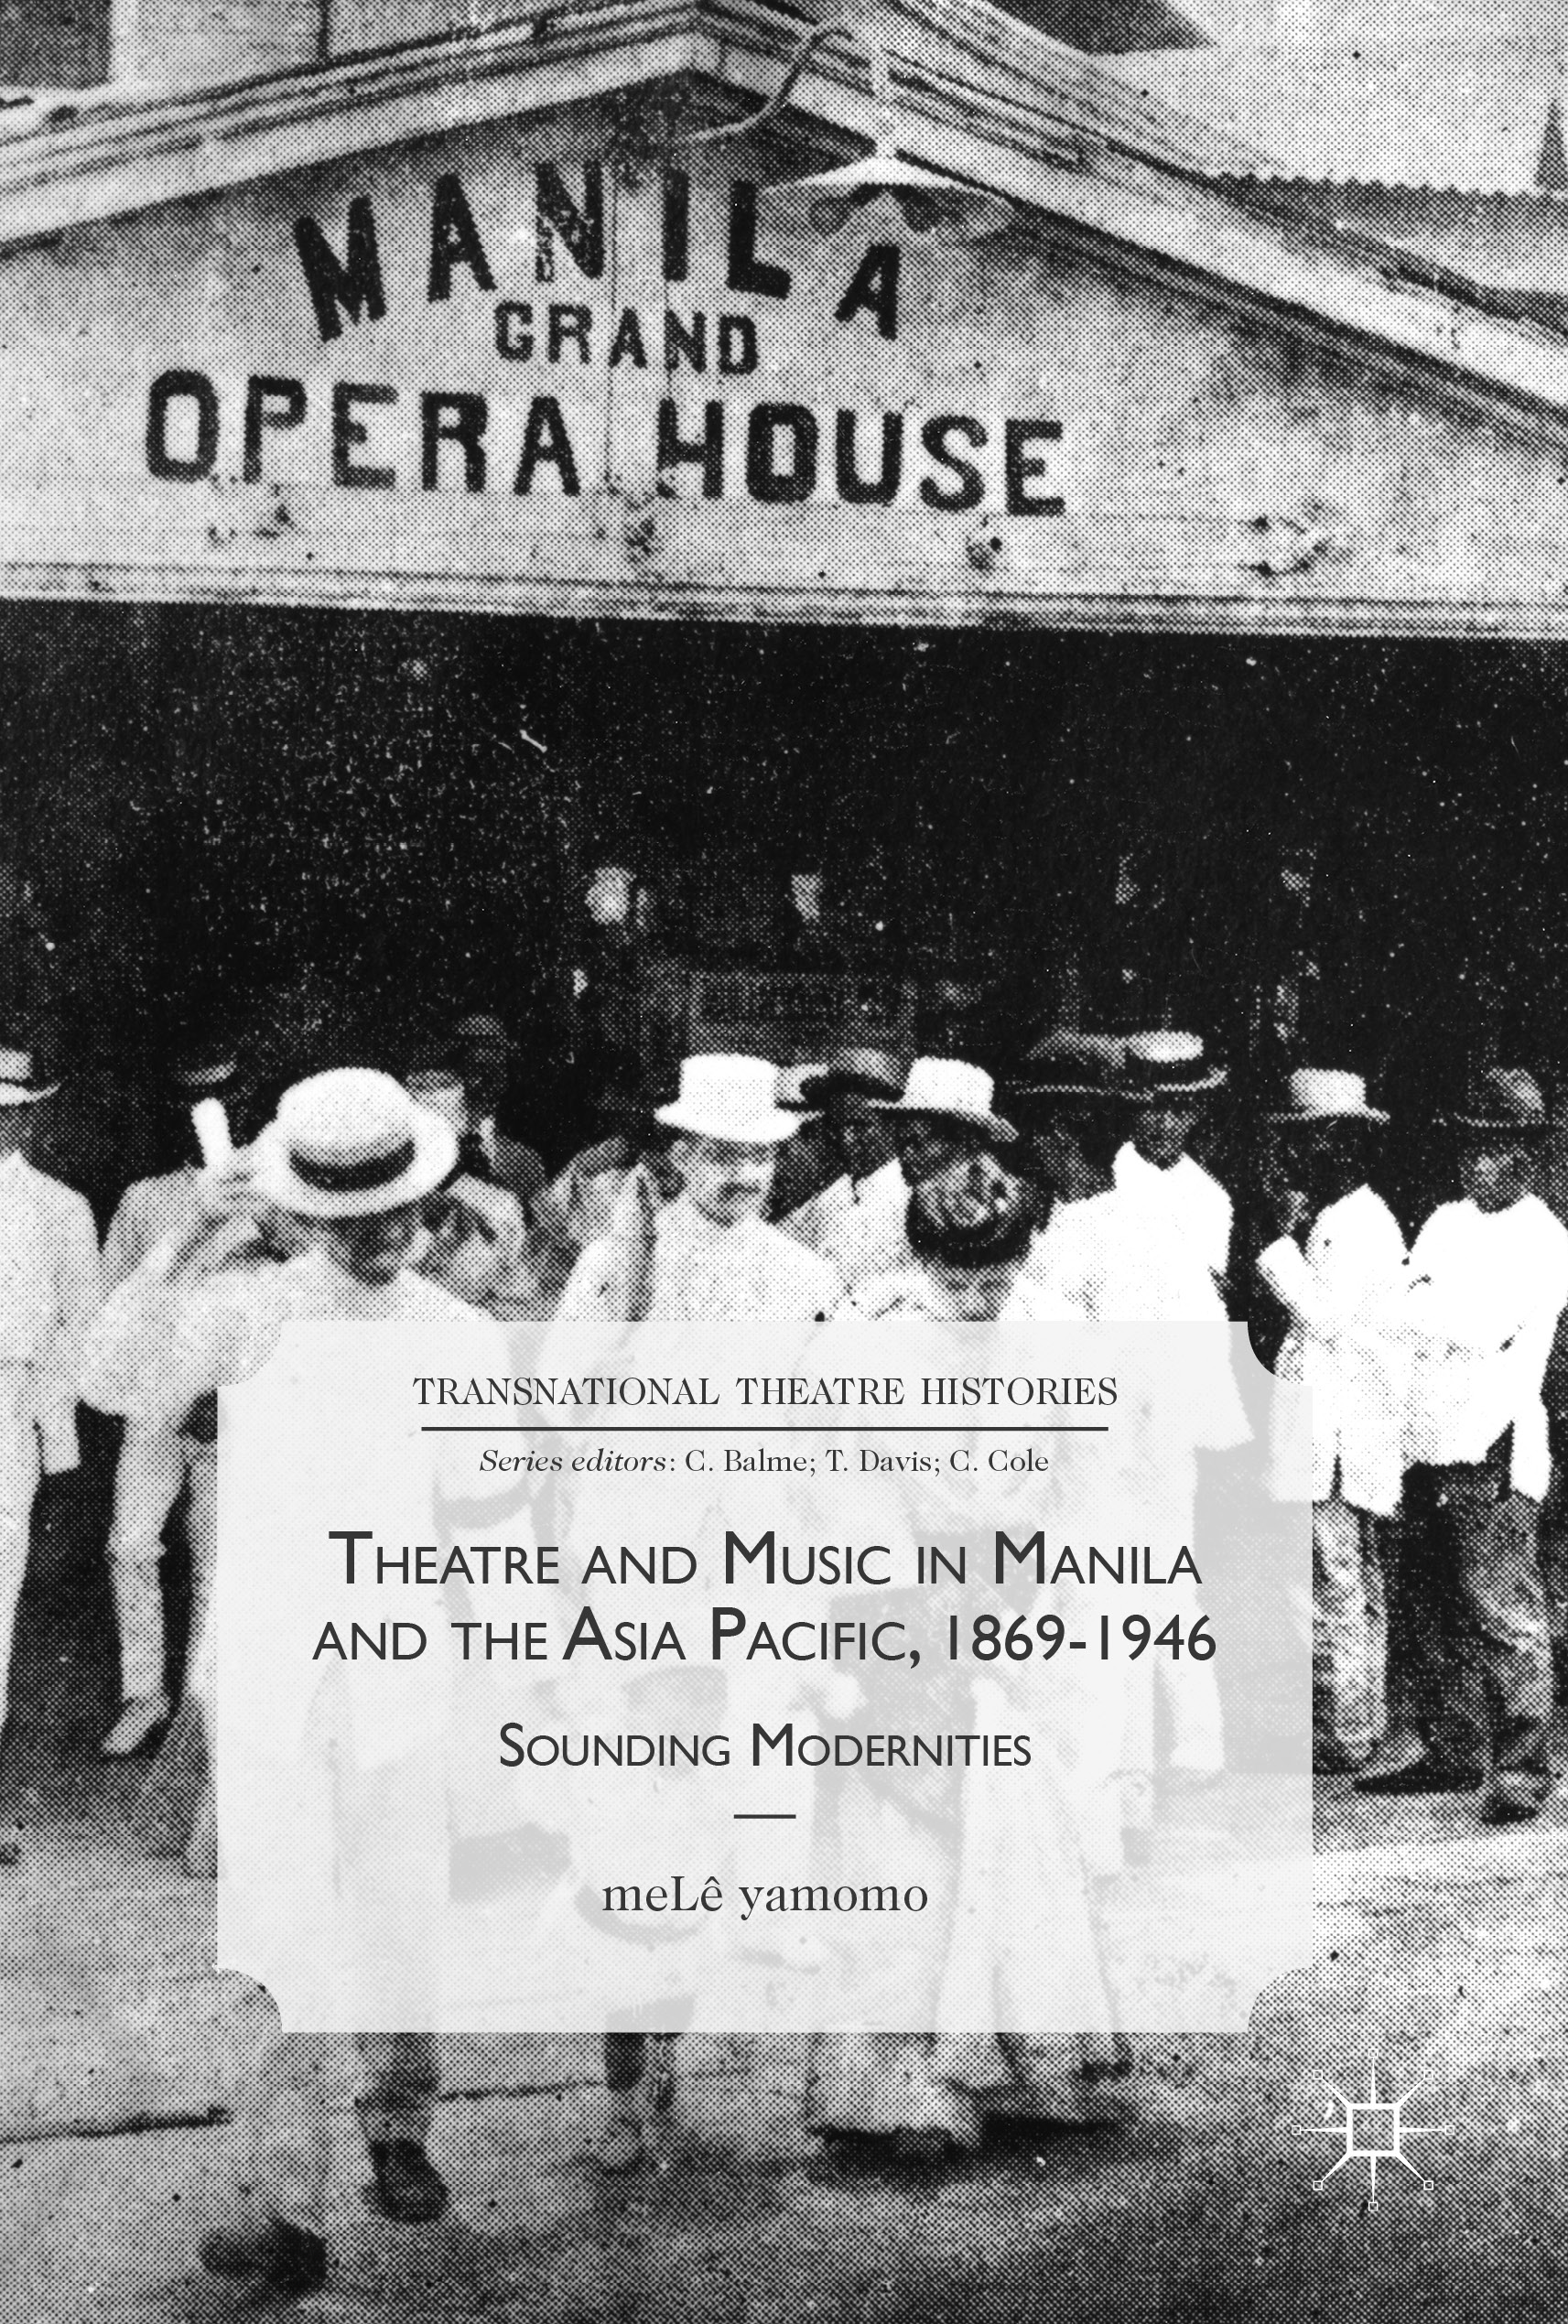 Sounding Modernities: Theatre and Music in Manila and the Asia Pacific, 1869-1946